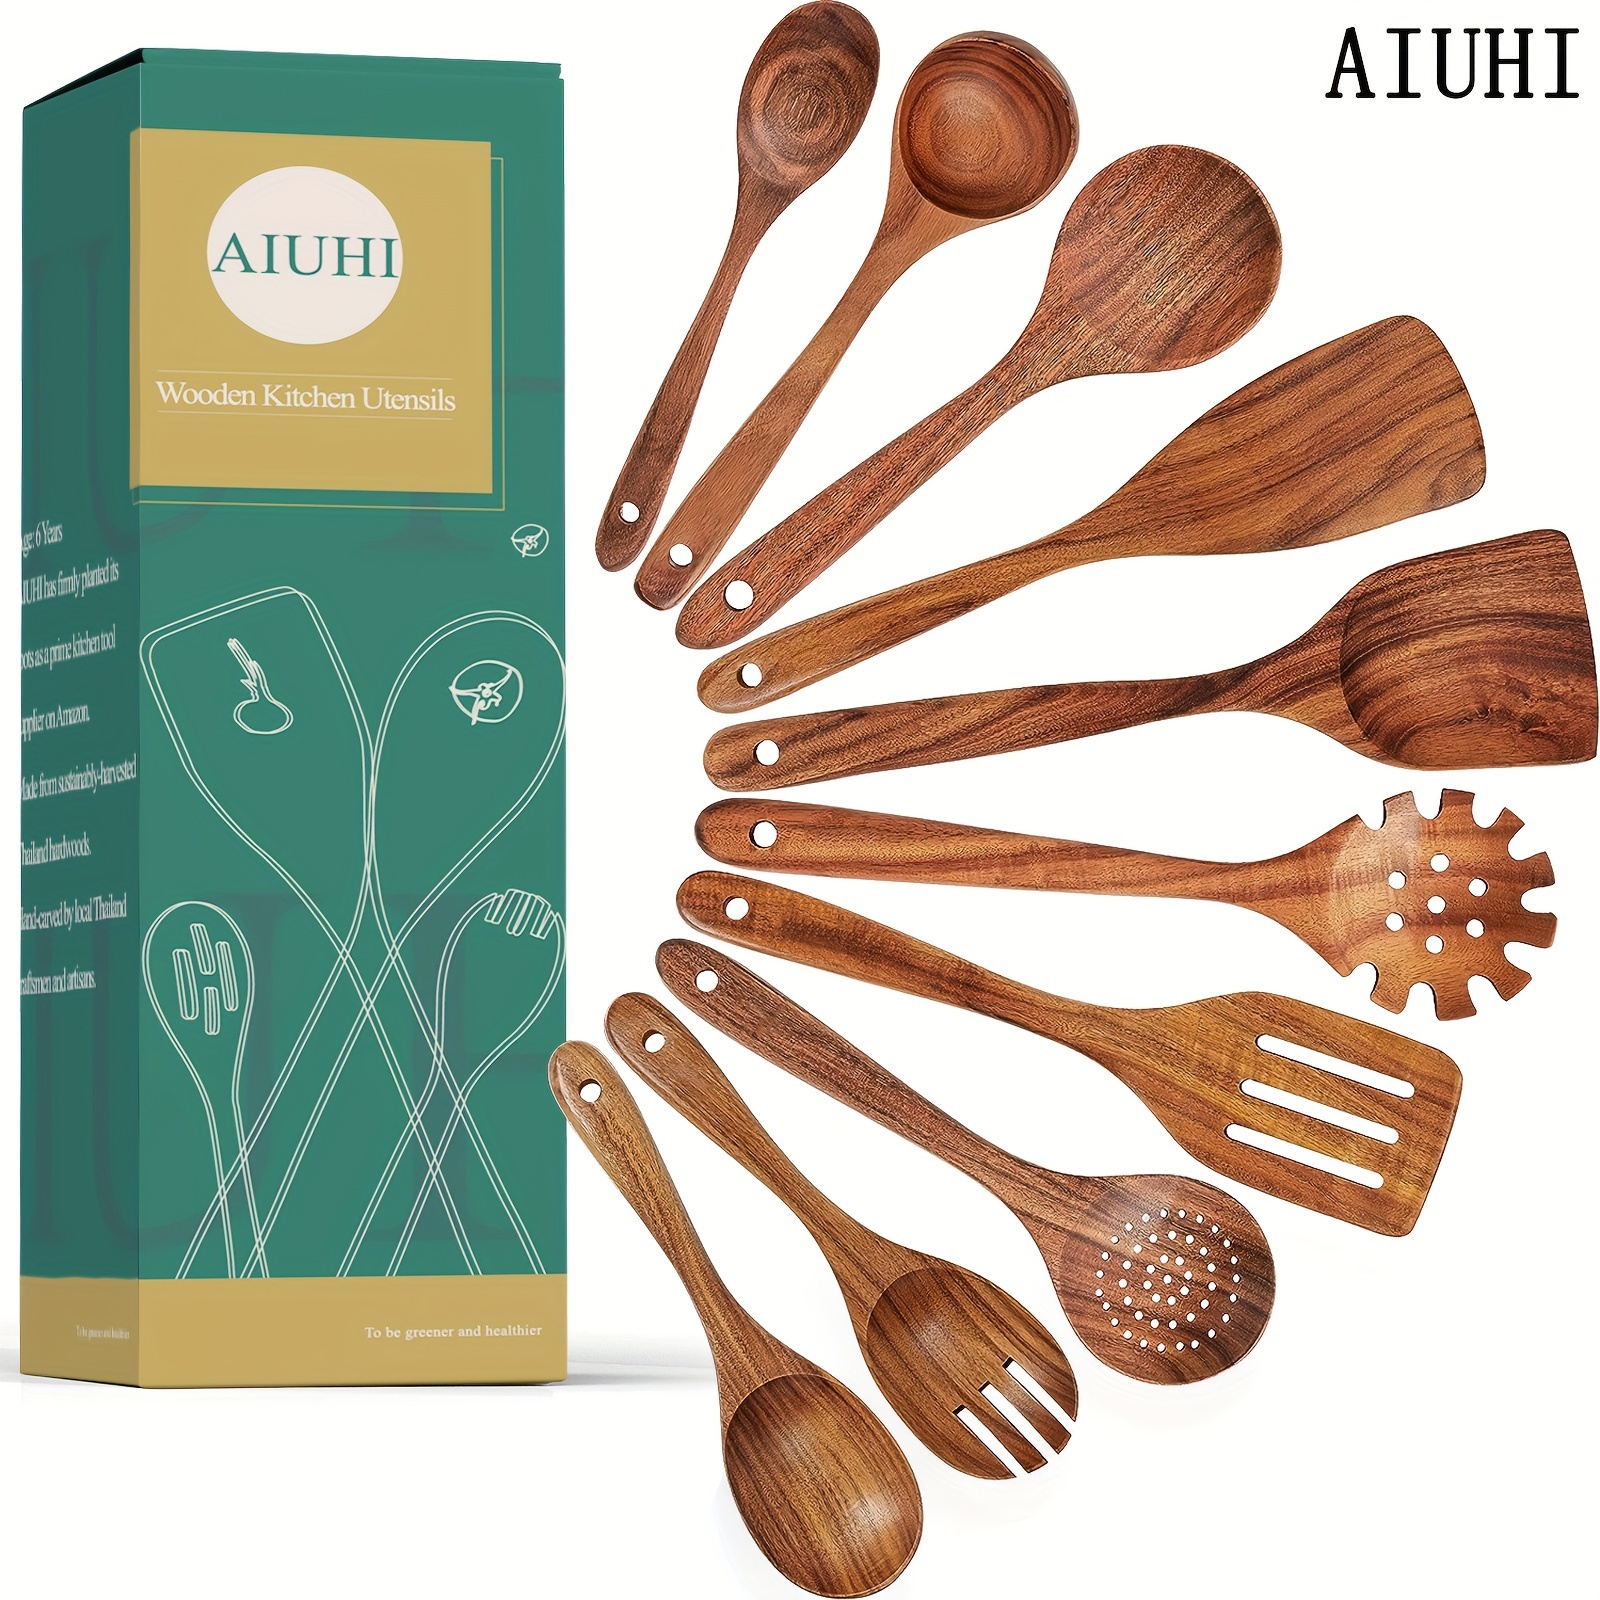 WOSPONFAN Kitchen Utensils Set - Wooden Spoons for Cooking, Natural Teak  Wooden Utensils - Includes Wooden Spoons, Spatula Set, Slotted Spoon 